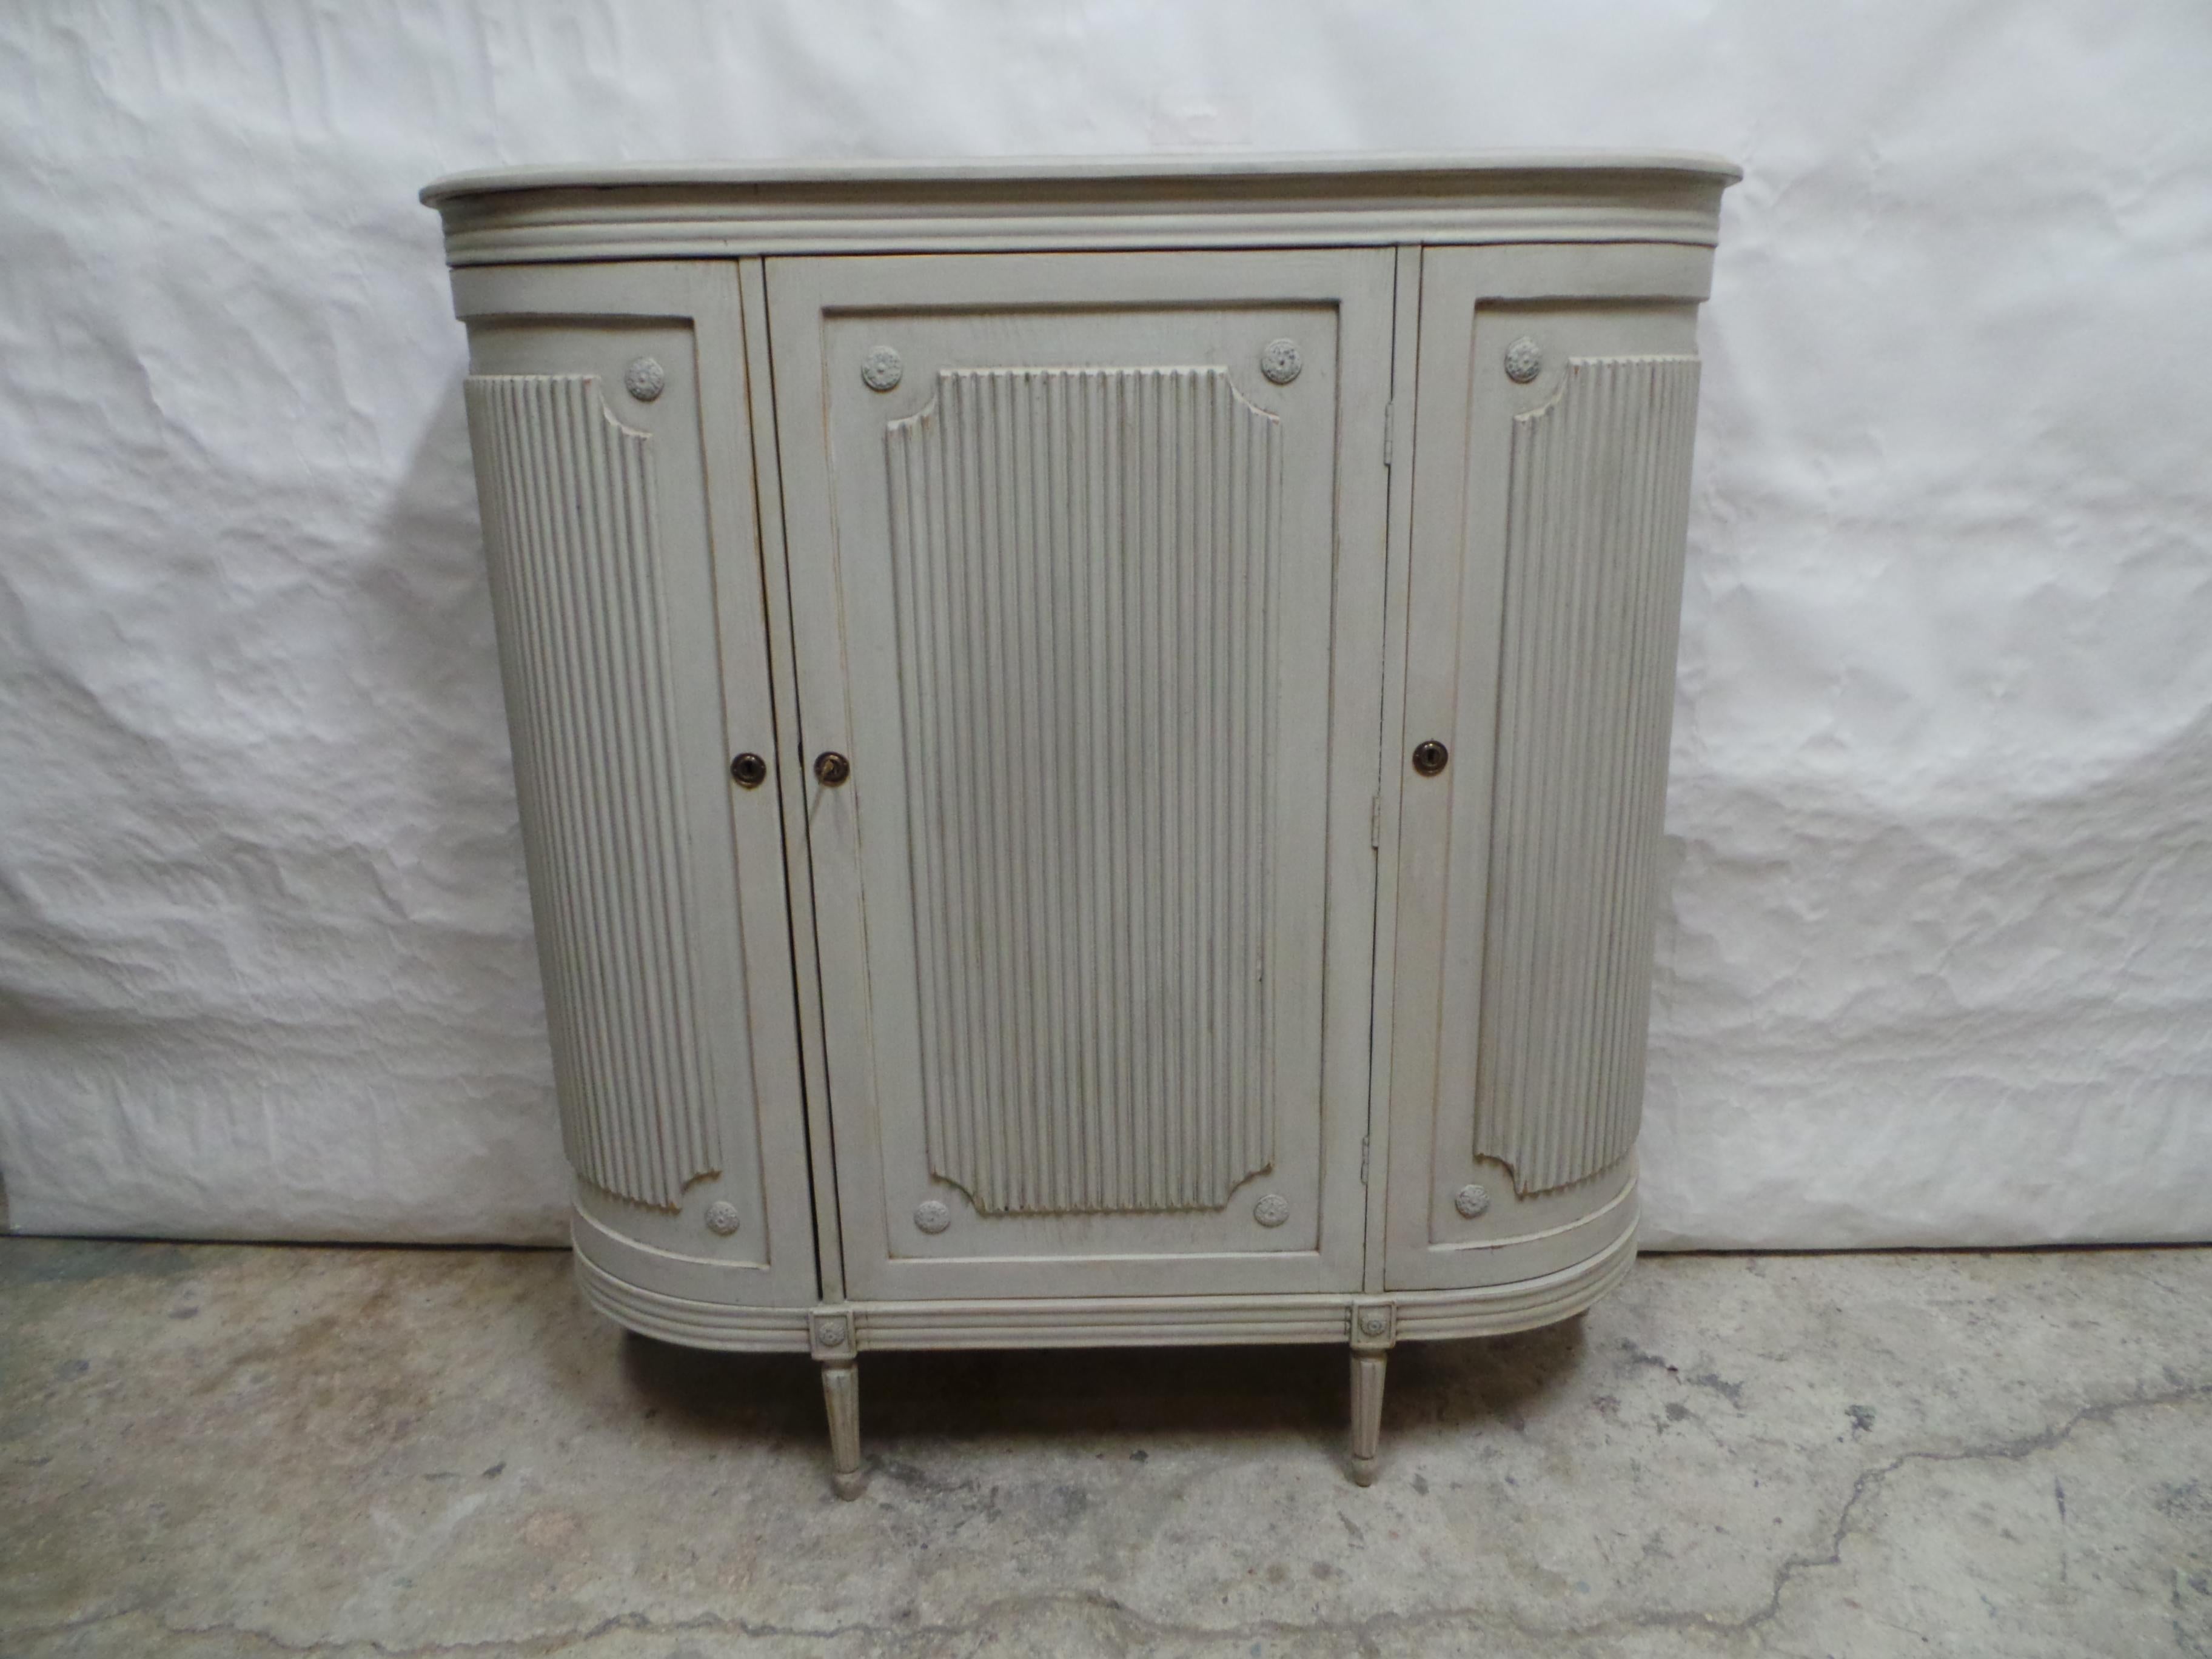 This is a Rare 3 Door Swedish Gustavian Sideboard. its been restored and repainted with Milk Paints 